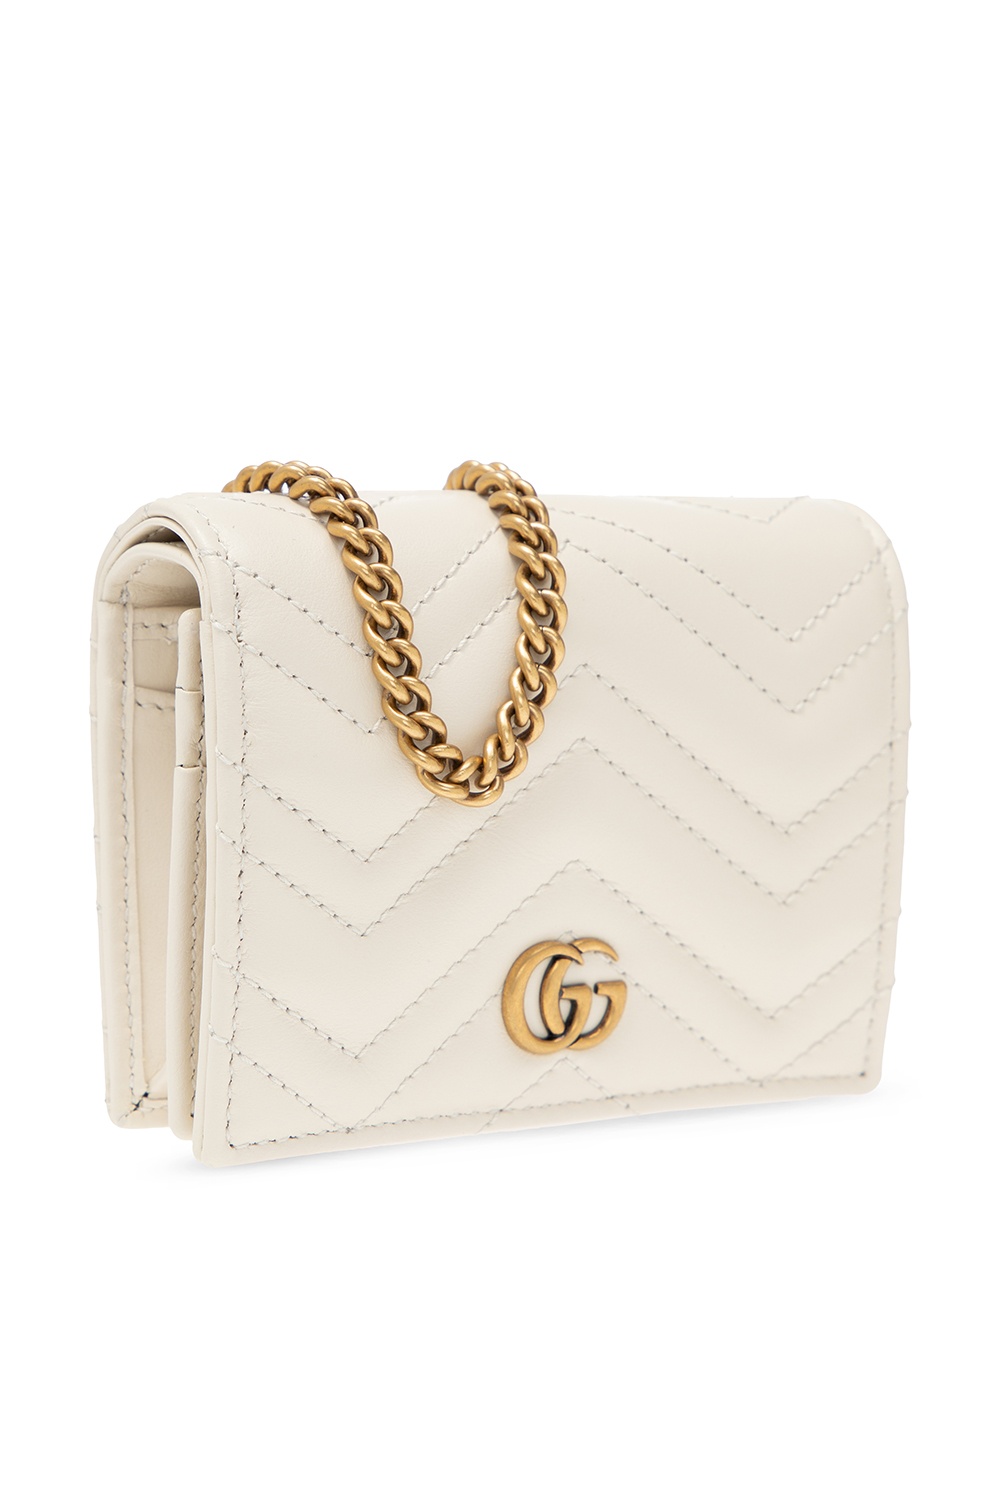 gucci chain wallet marmont